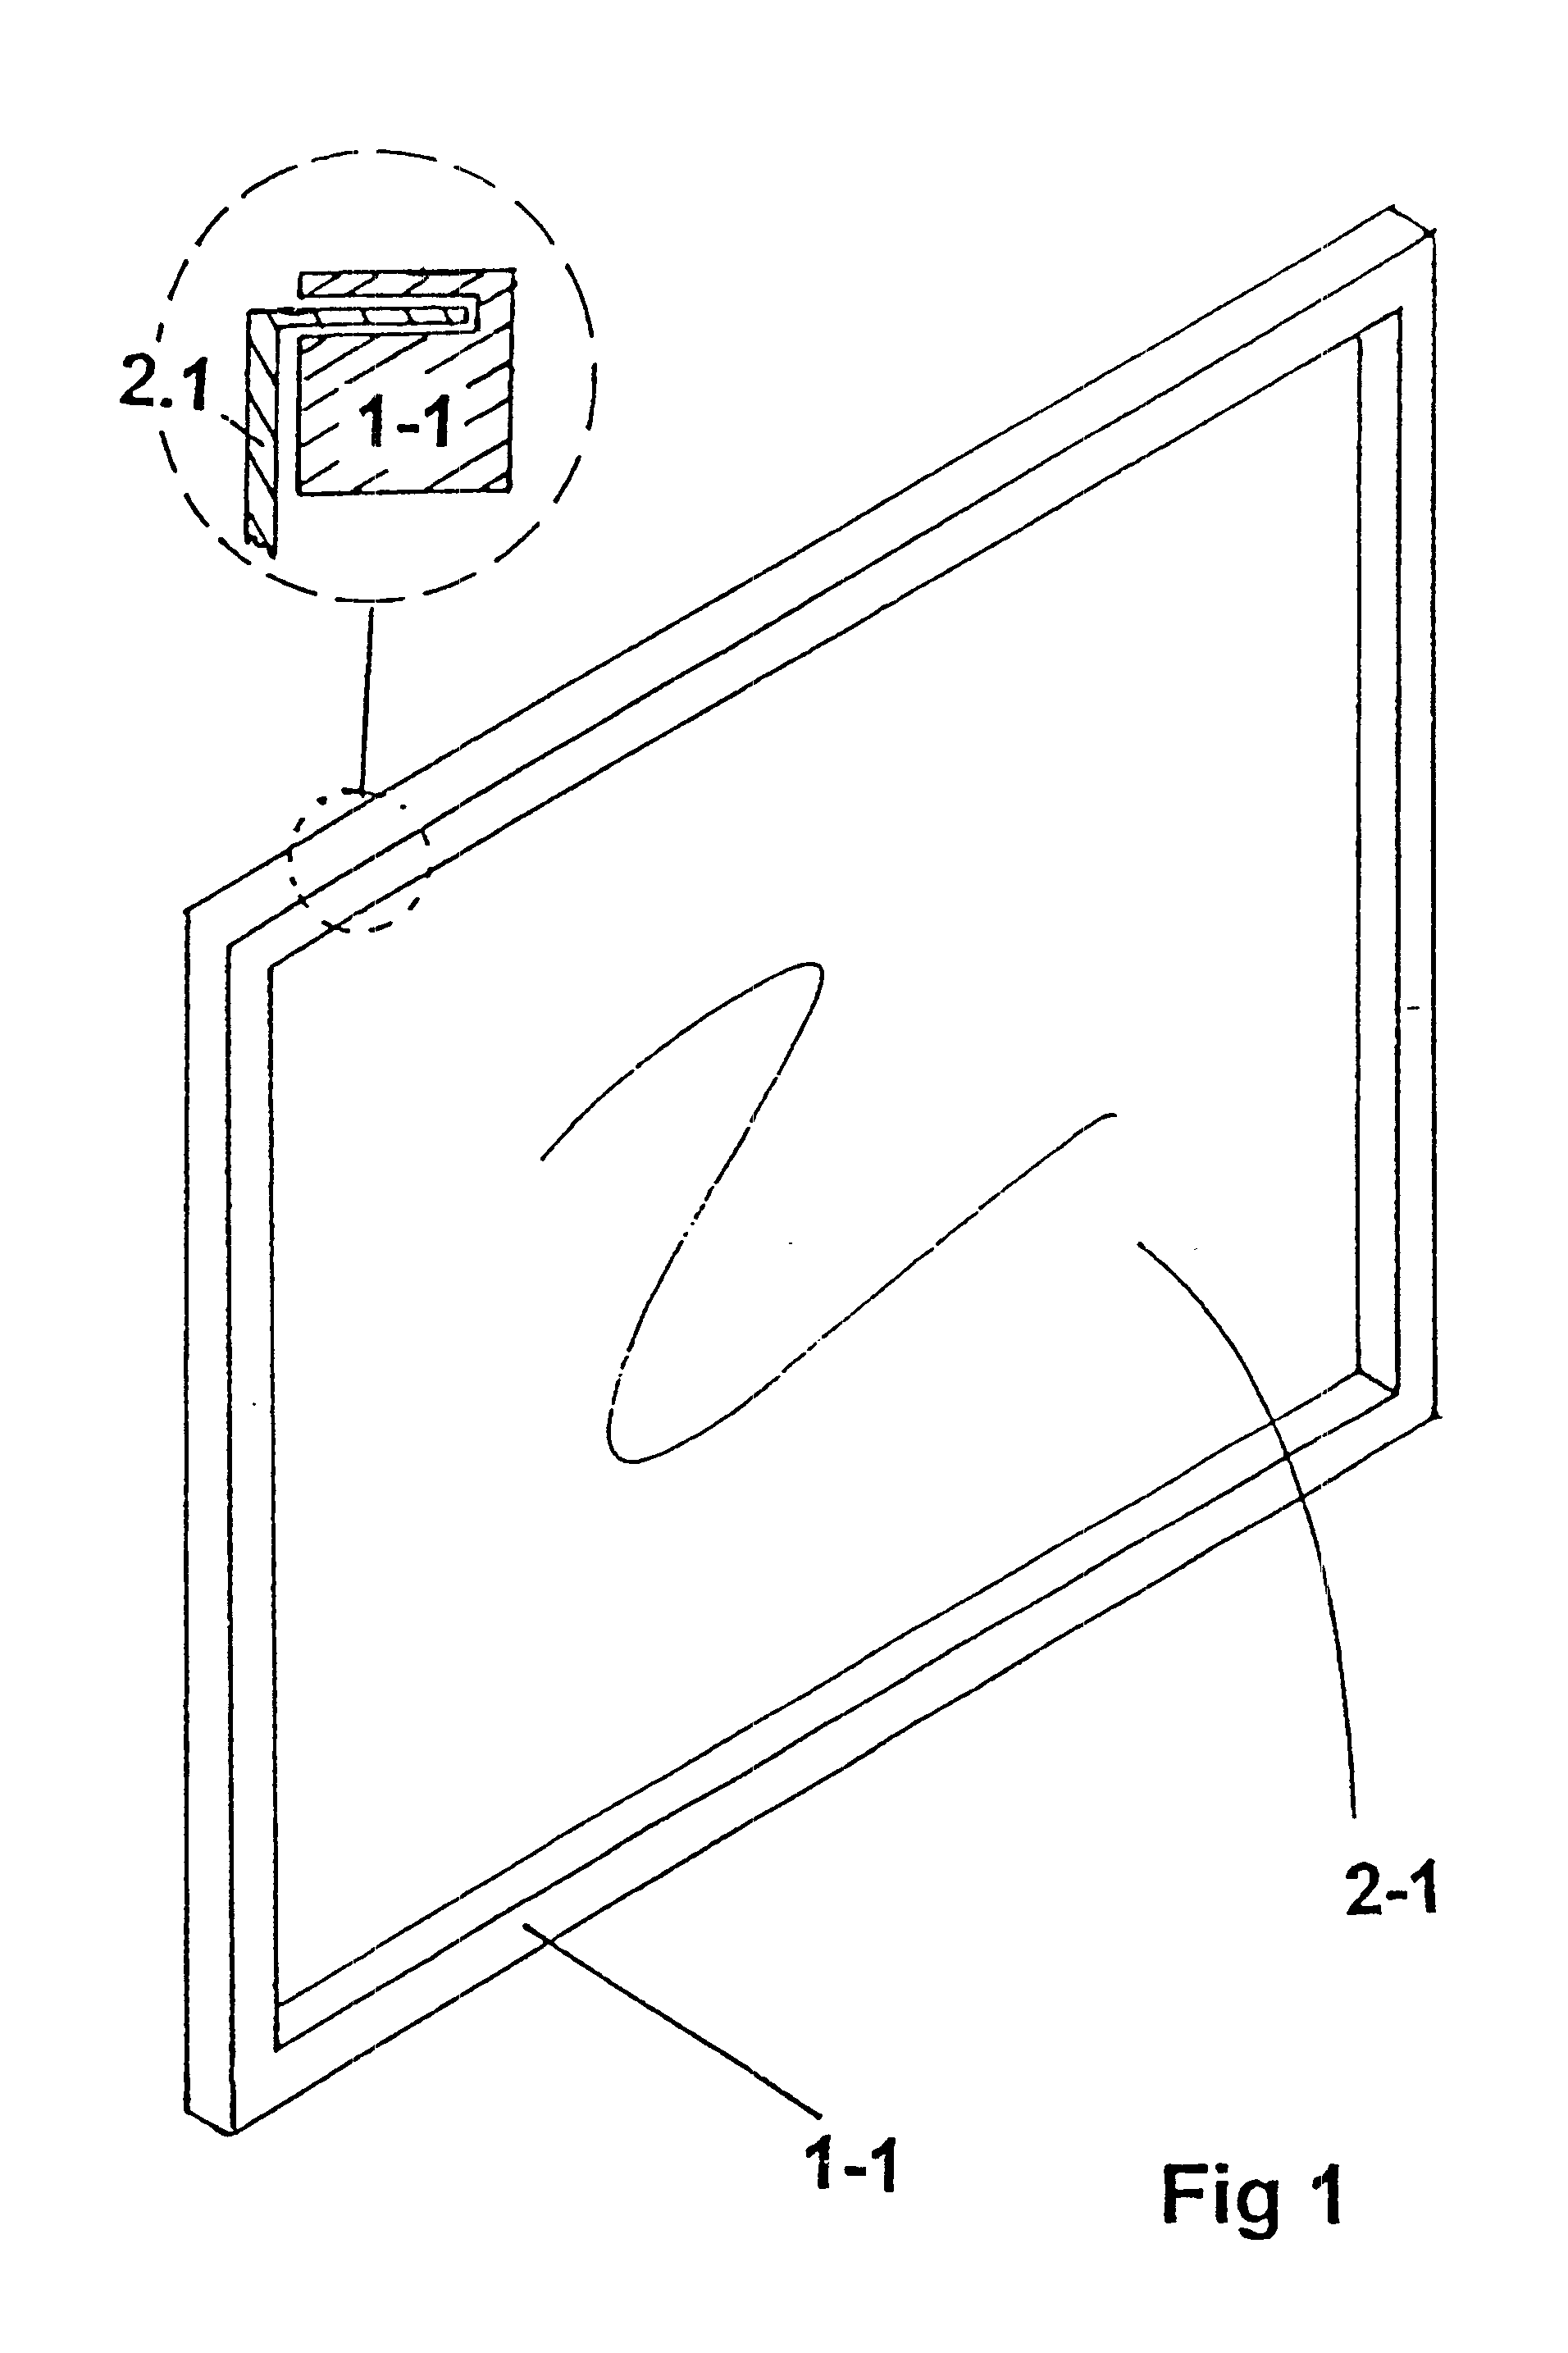 Portable visual display device with a collapsible presentation screen